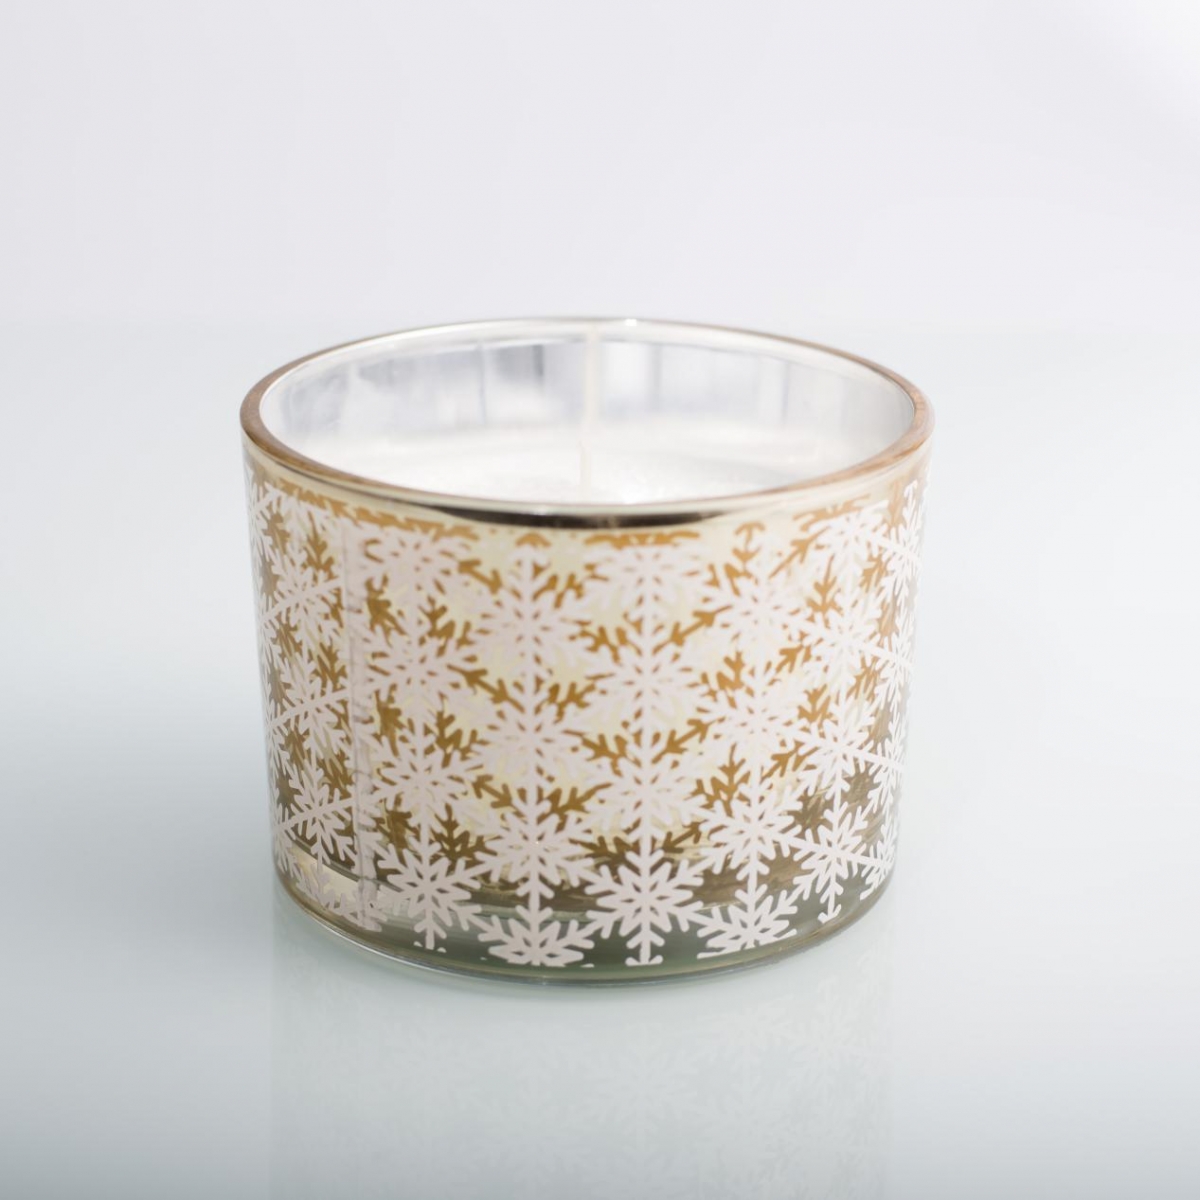 Scented Candles -White Snowflake ,Red Sliver Glass Pots ,Christmas Candles ,China Factory ,Price-HOWCANDLE-Candles,Scented Candles,Aromatherapy Candles,Soy Candles,Vegan Candles,Jar Candles,Pillar Candles,Candle Gift Sets,Essential Oils,Reed Diffuser,Candle Holder,